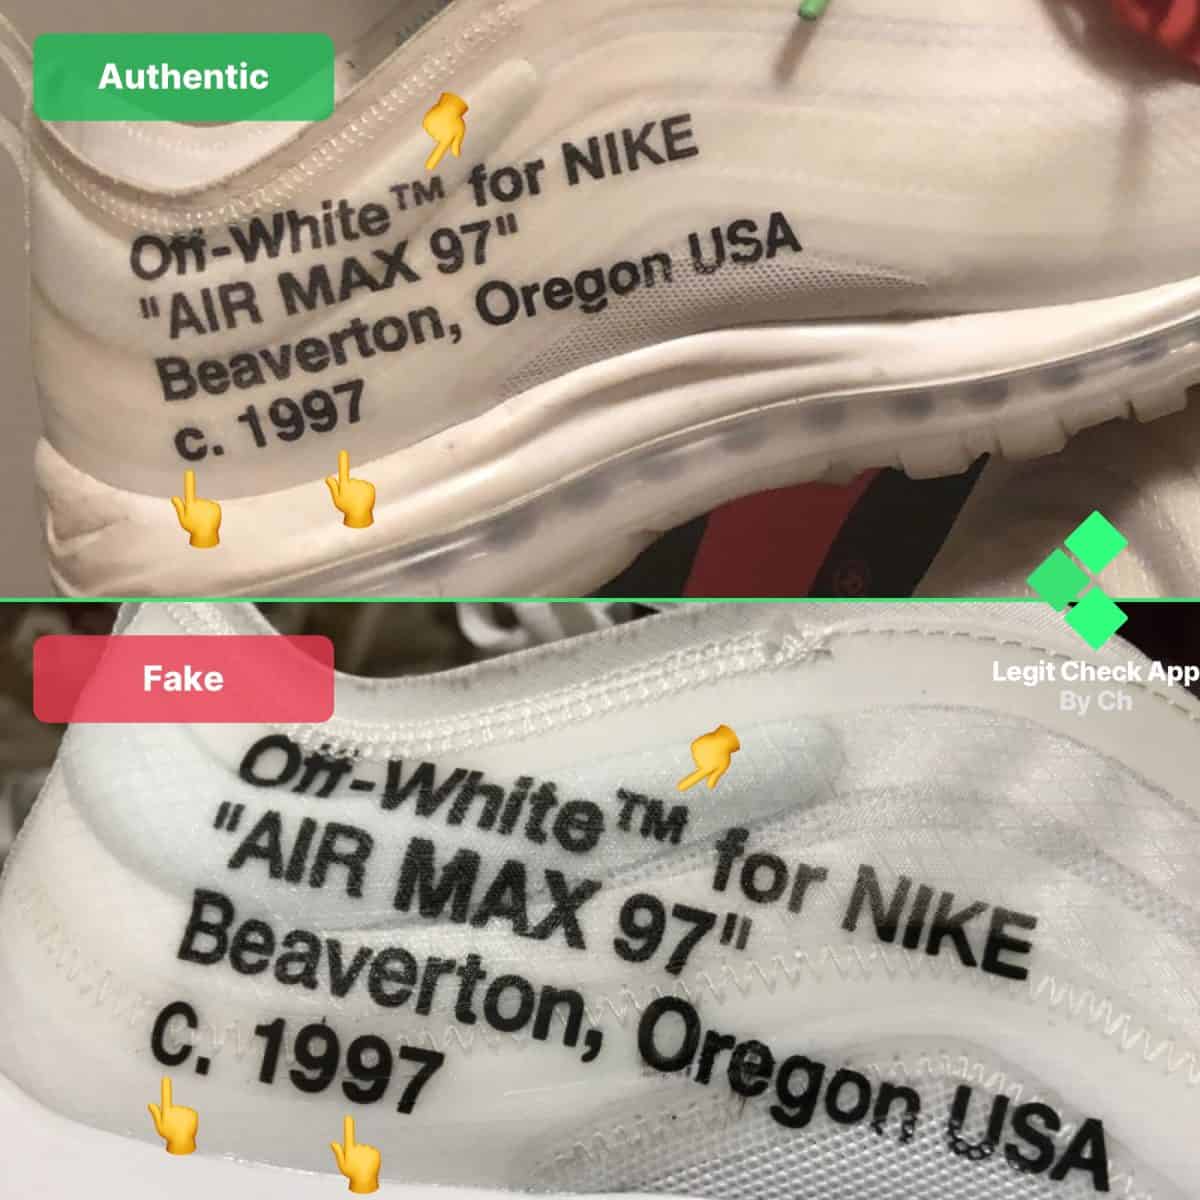 Real Vs Fake Off-White Shoes